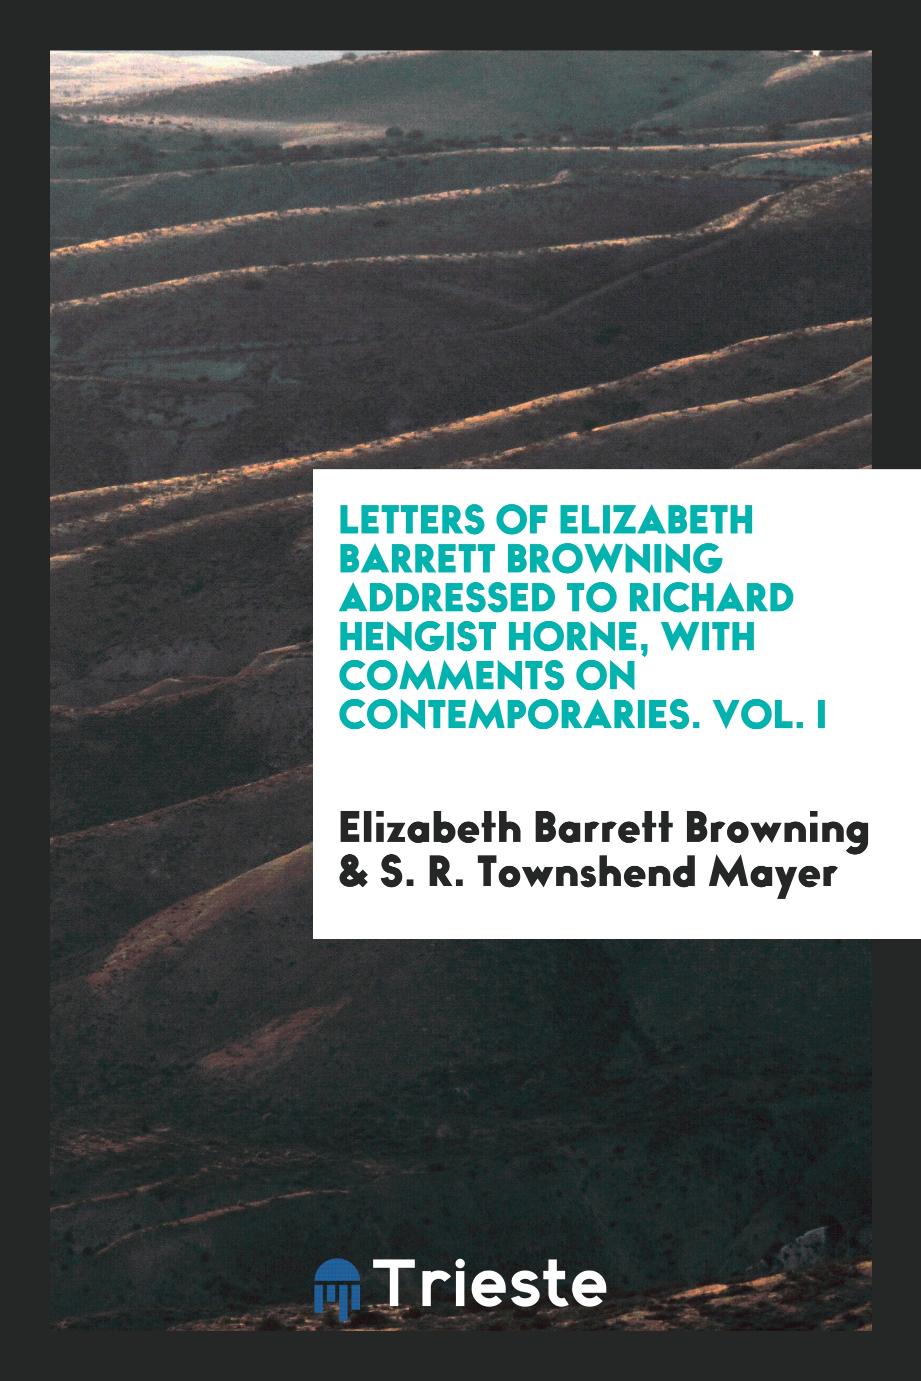 Letters of Elizabeth Barrett Browning addressed to Richard Hengist Horne, with comments on contemporaries. Vol. I